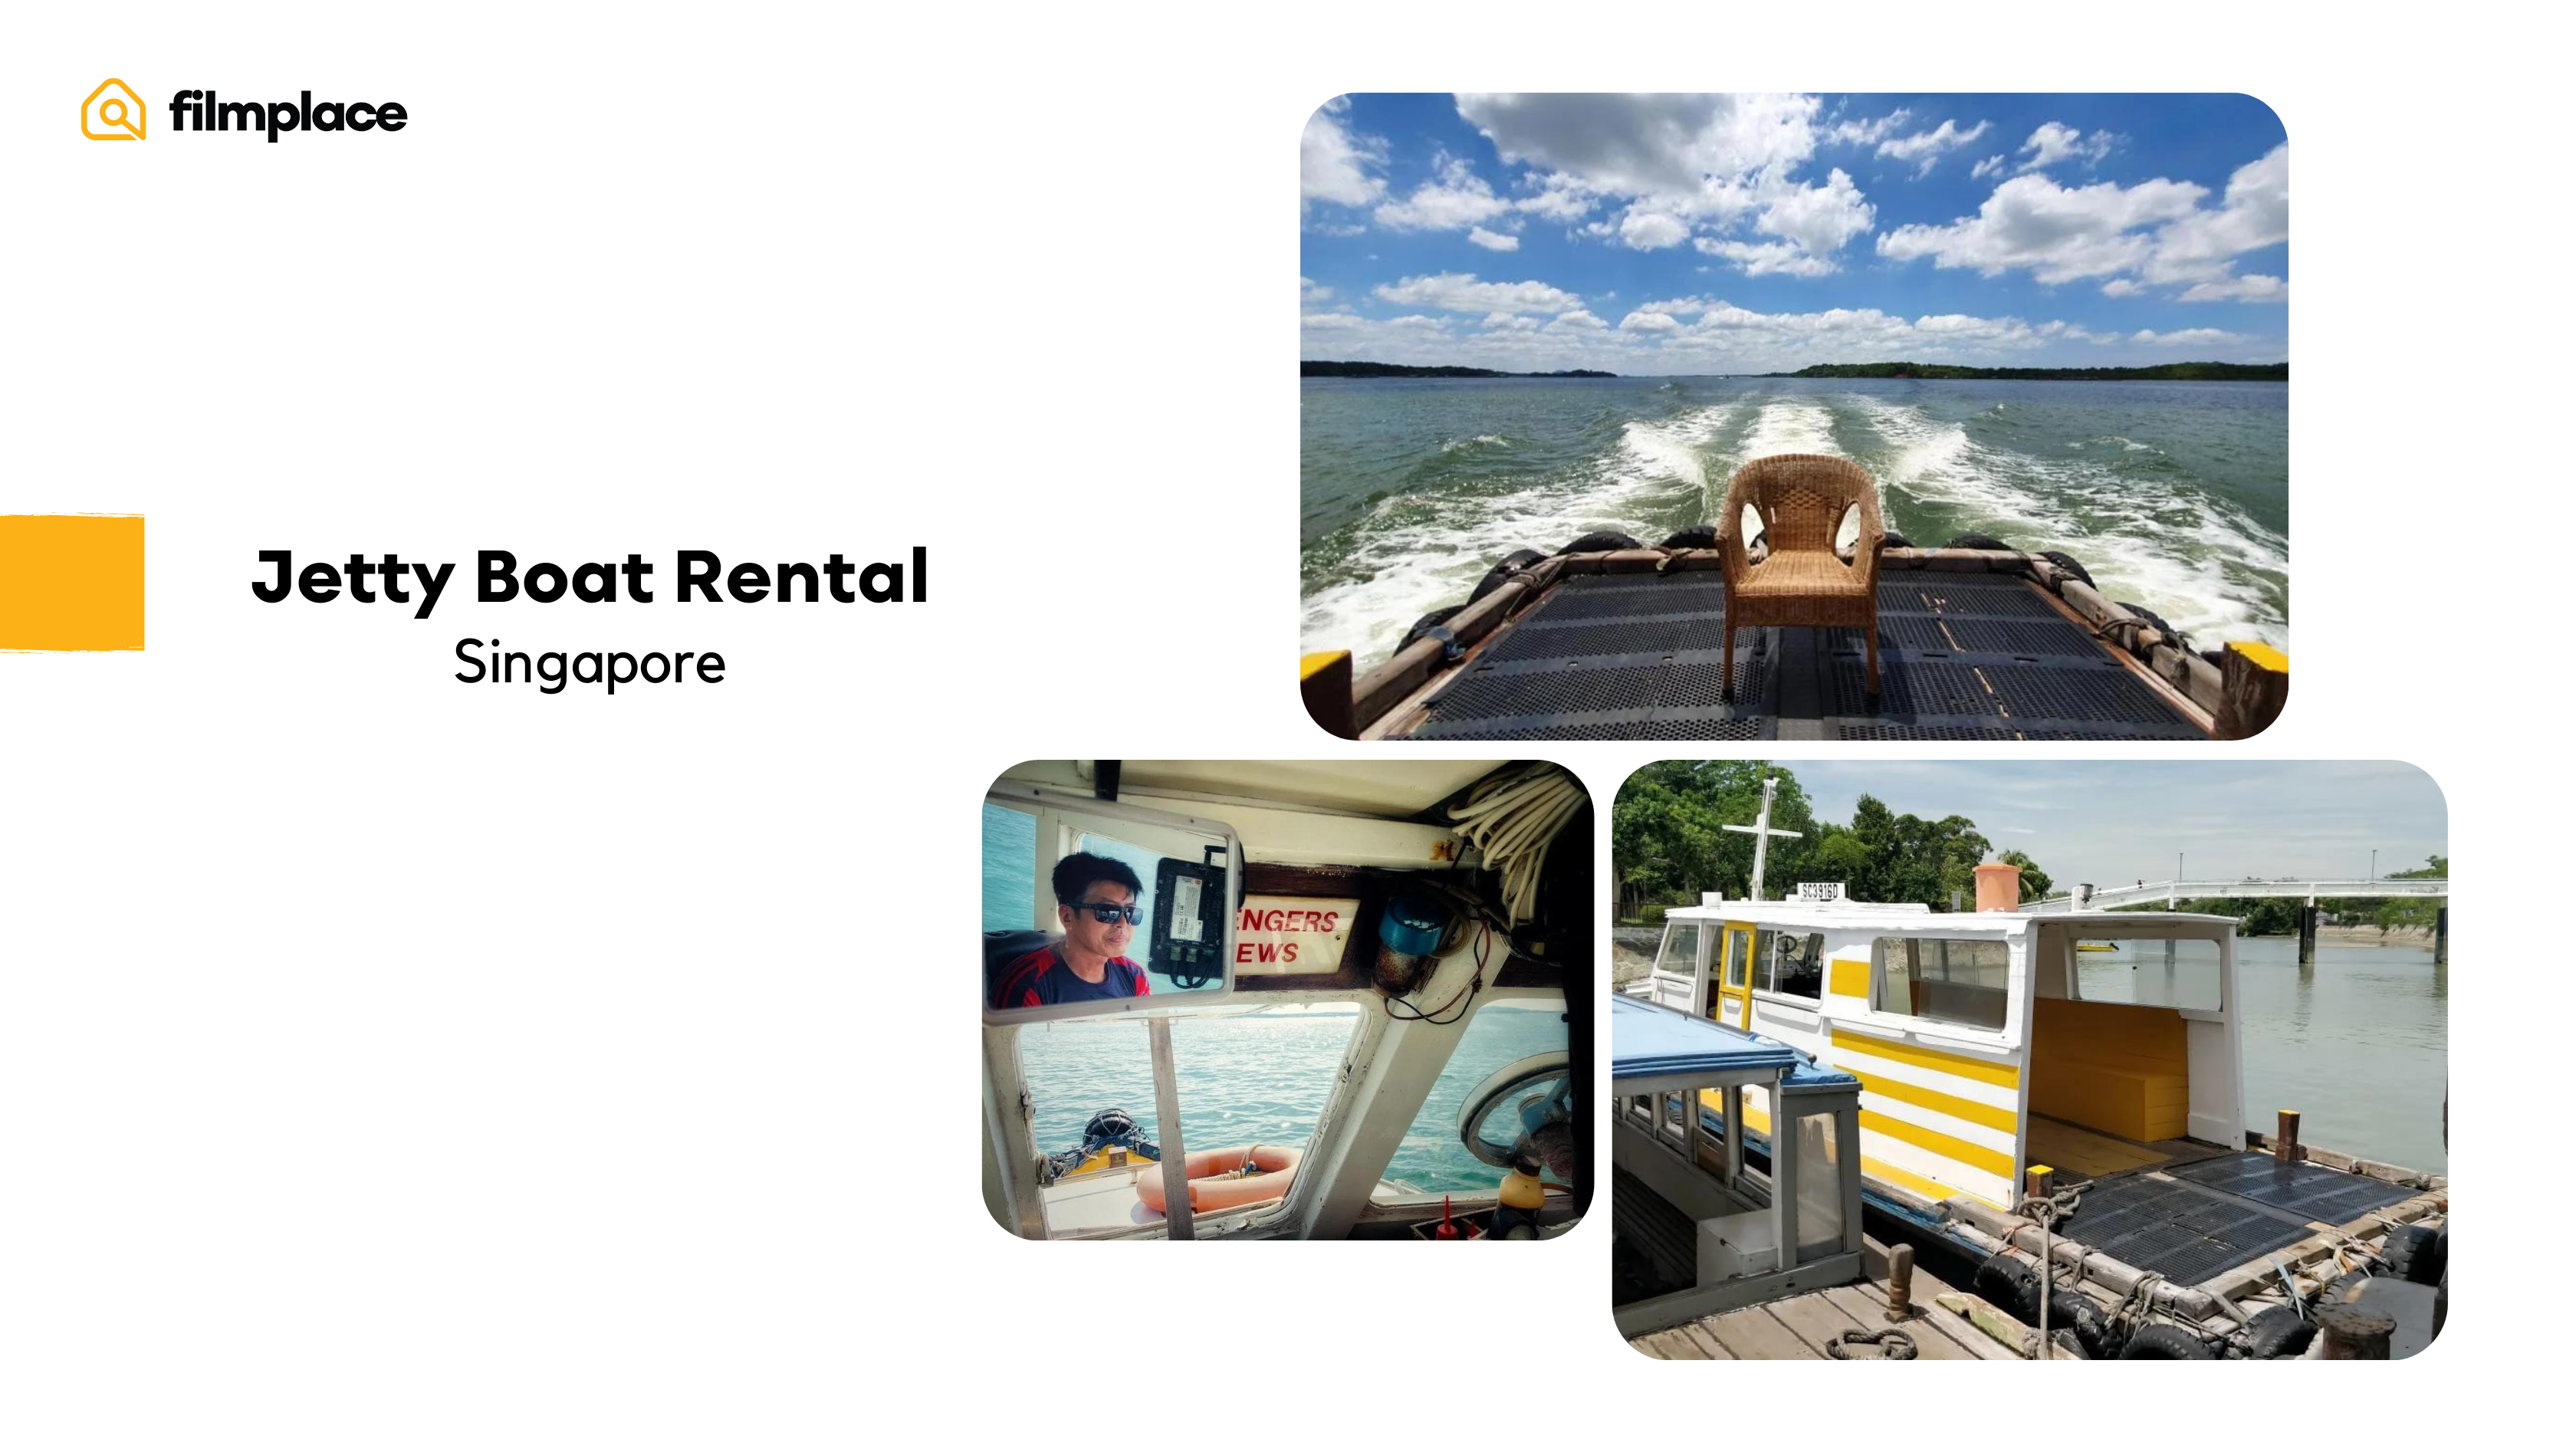 Filmplace fourth top film location pick April: listing 10030 Jetty Boat Rental in Singapore photo collage